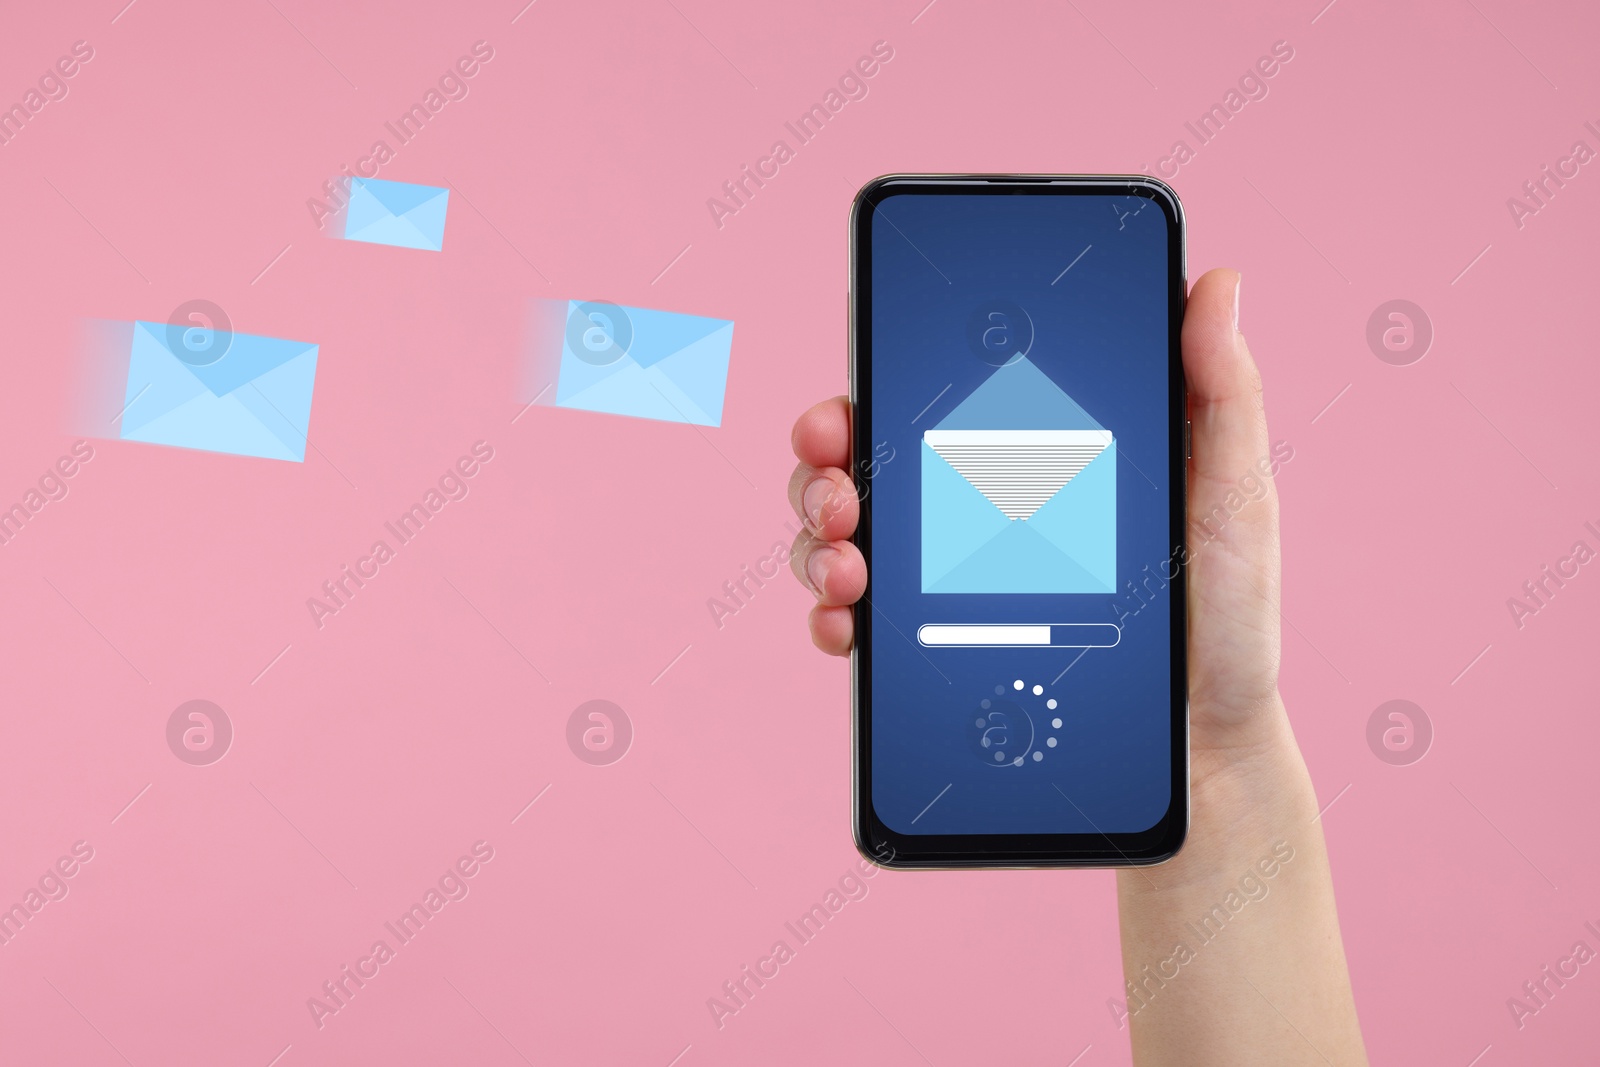 Image of Got new message. Woman holding smartphone on pink background, closeup